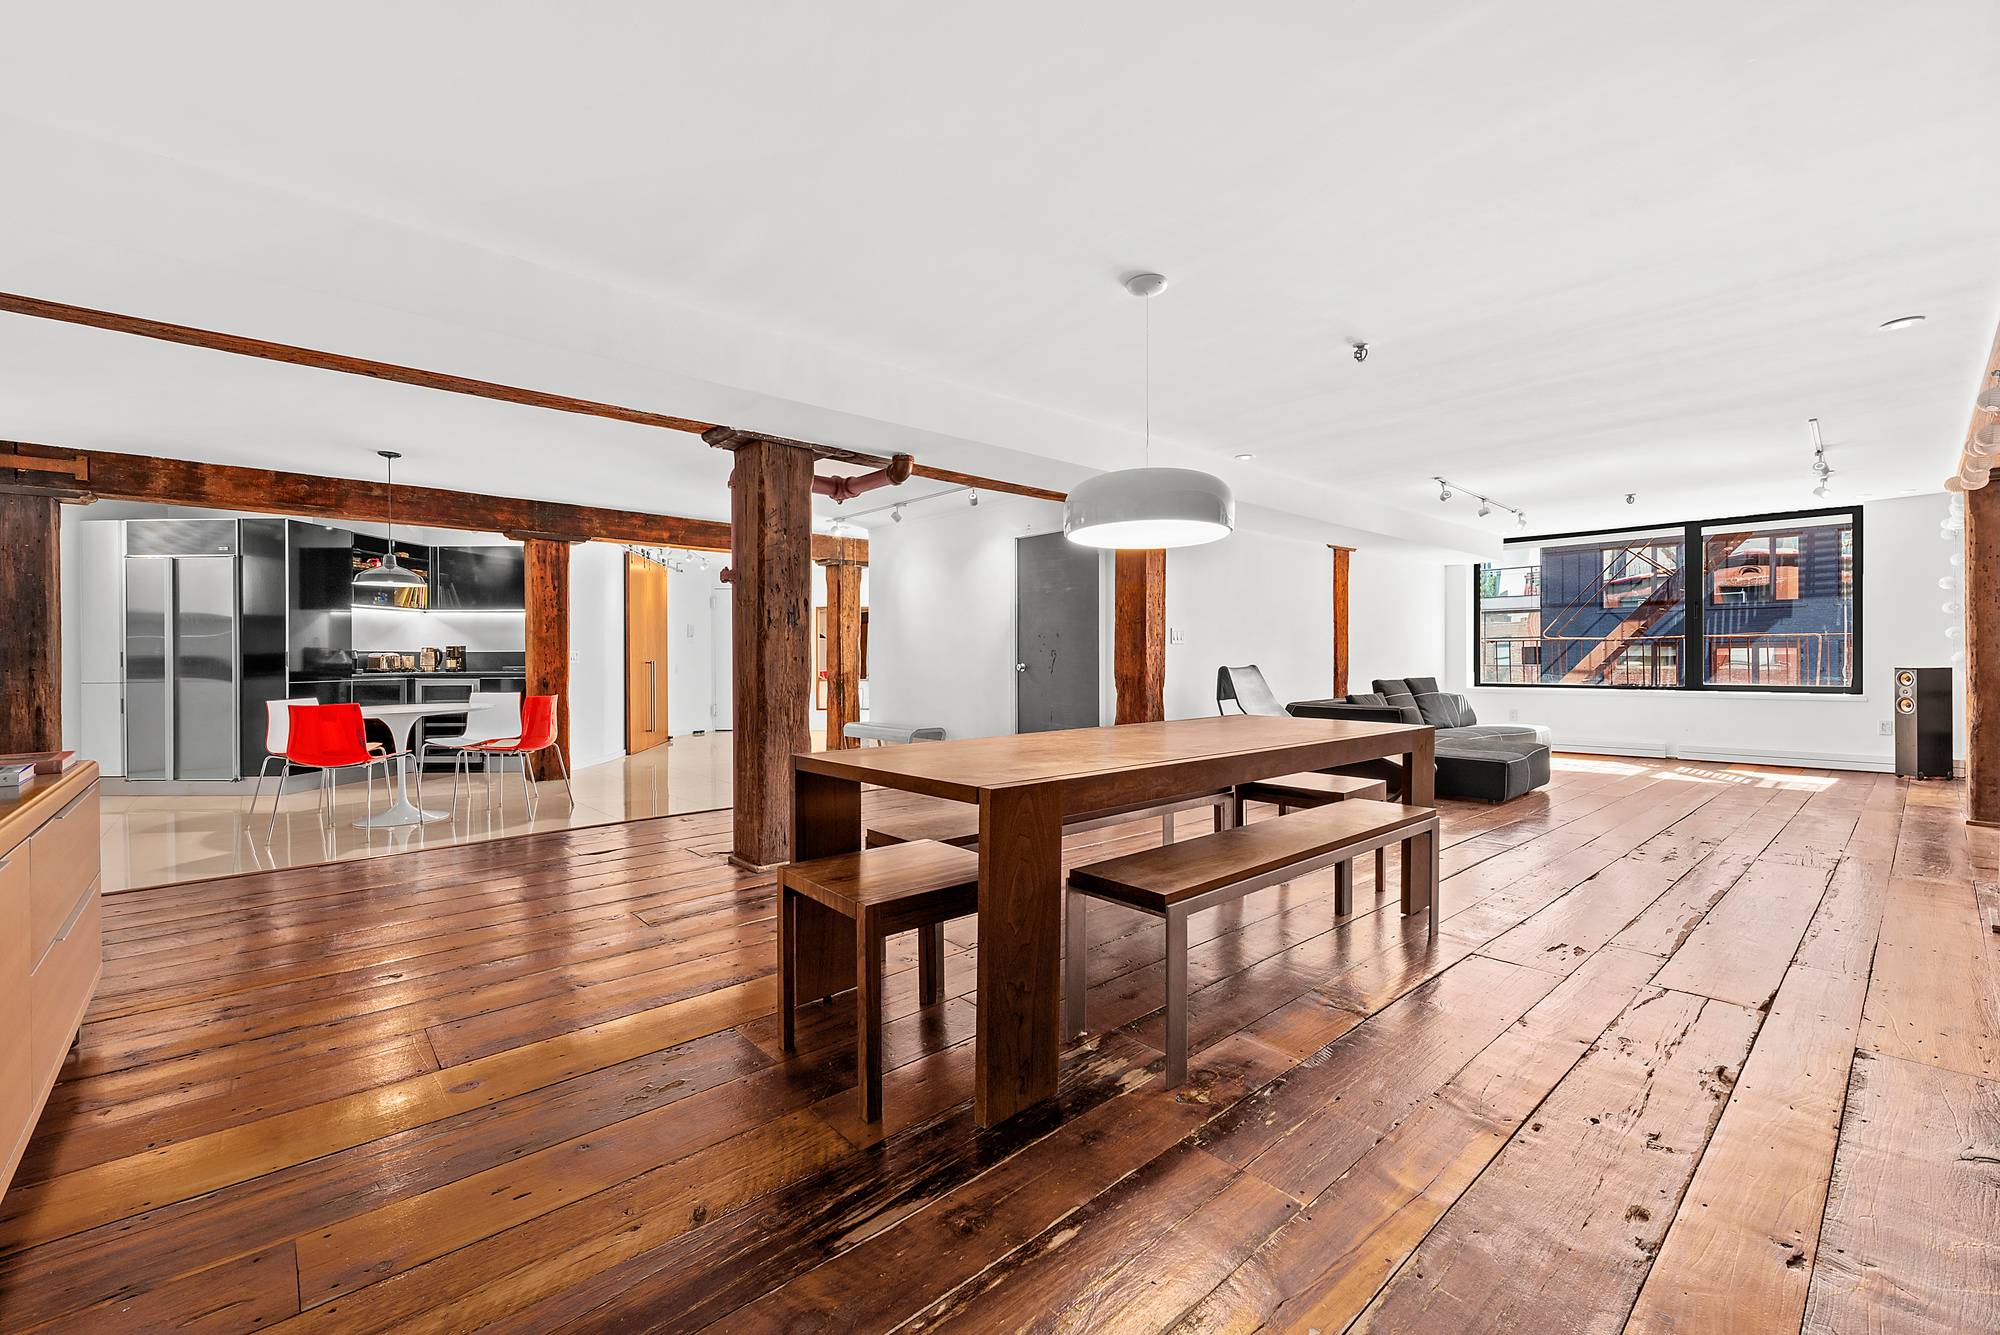 Stunning original loft details and a perfect location just a block from the Hudson make this sprawling three bedroom plus home office, two bathroom loft a must see Tribeca sanctuary.